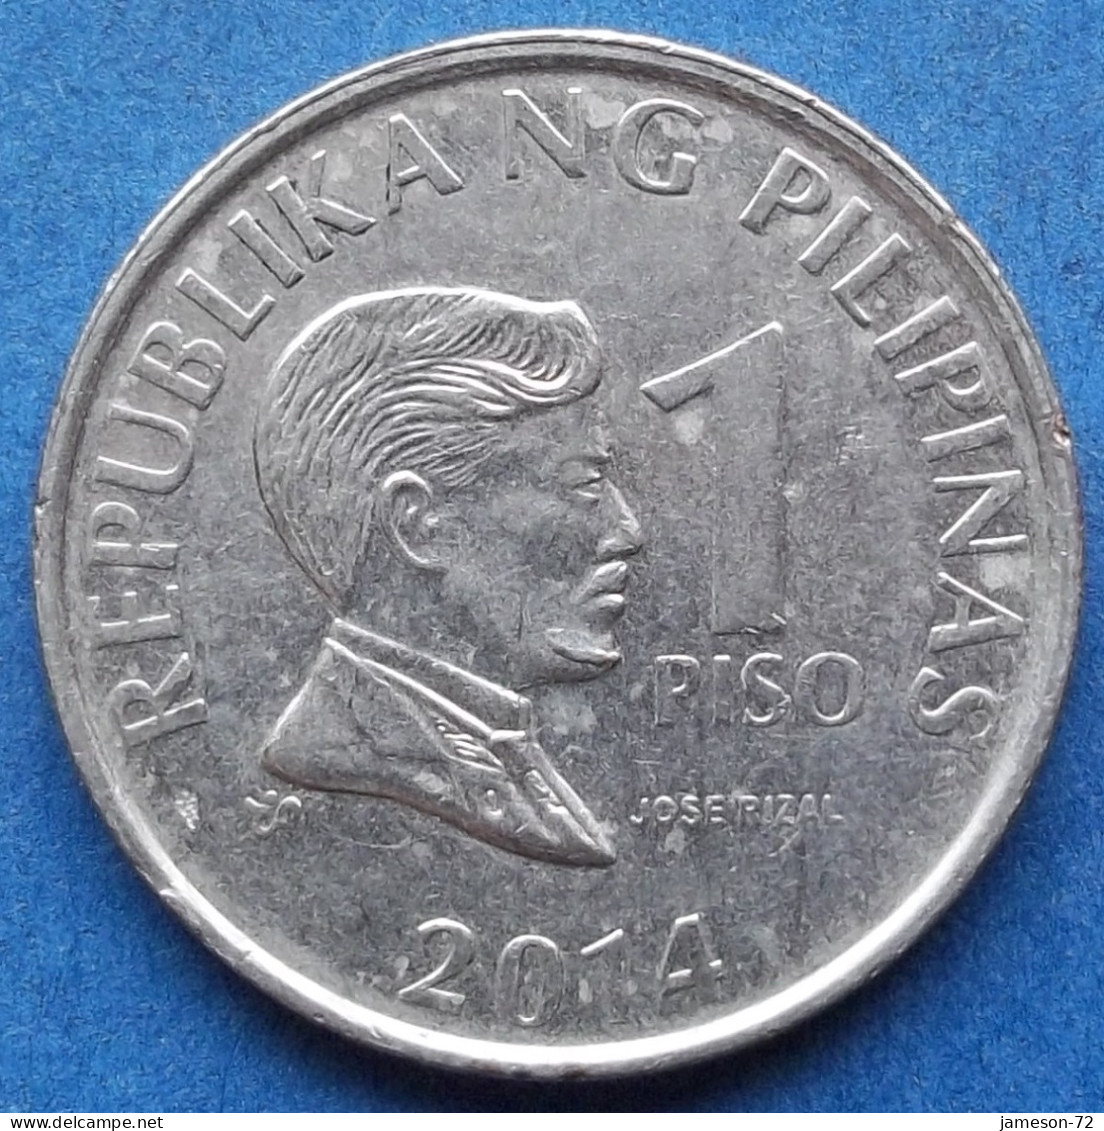 PHILIPPINES - 1 Piso 2014 "Jose Rizal" KM# 269a Monetary Reform (1967) - Edelweiss Coins - Philippines